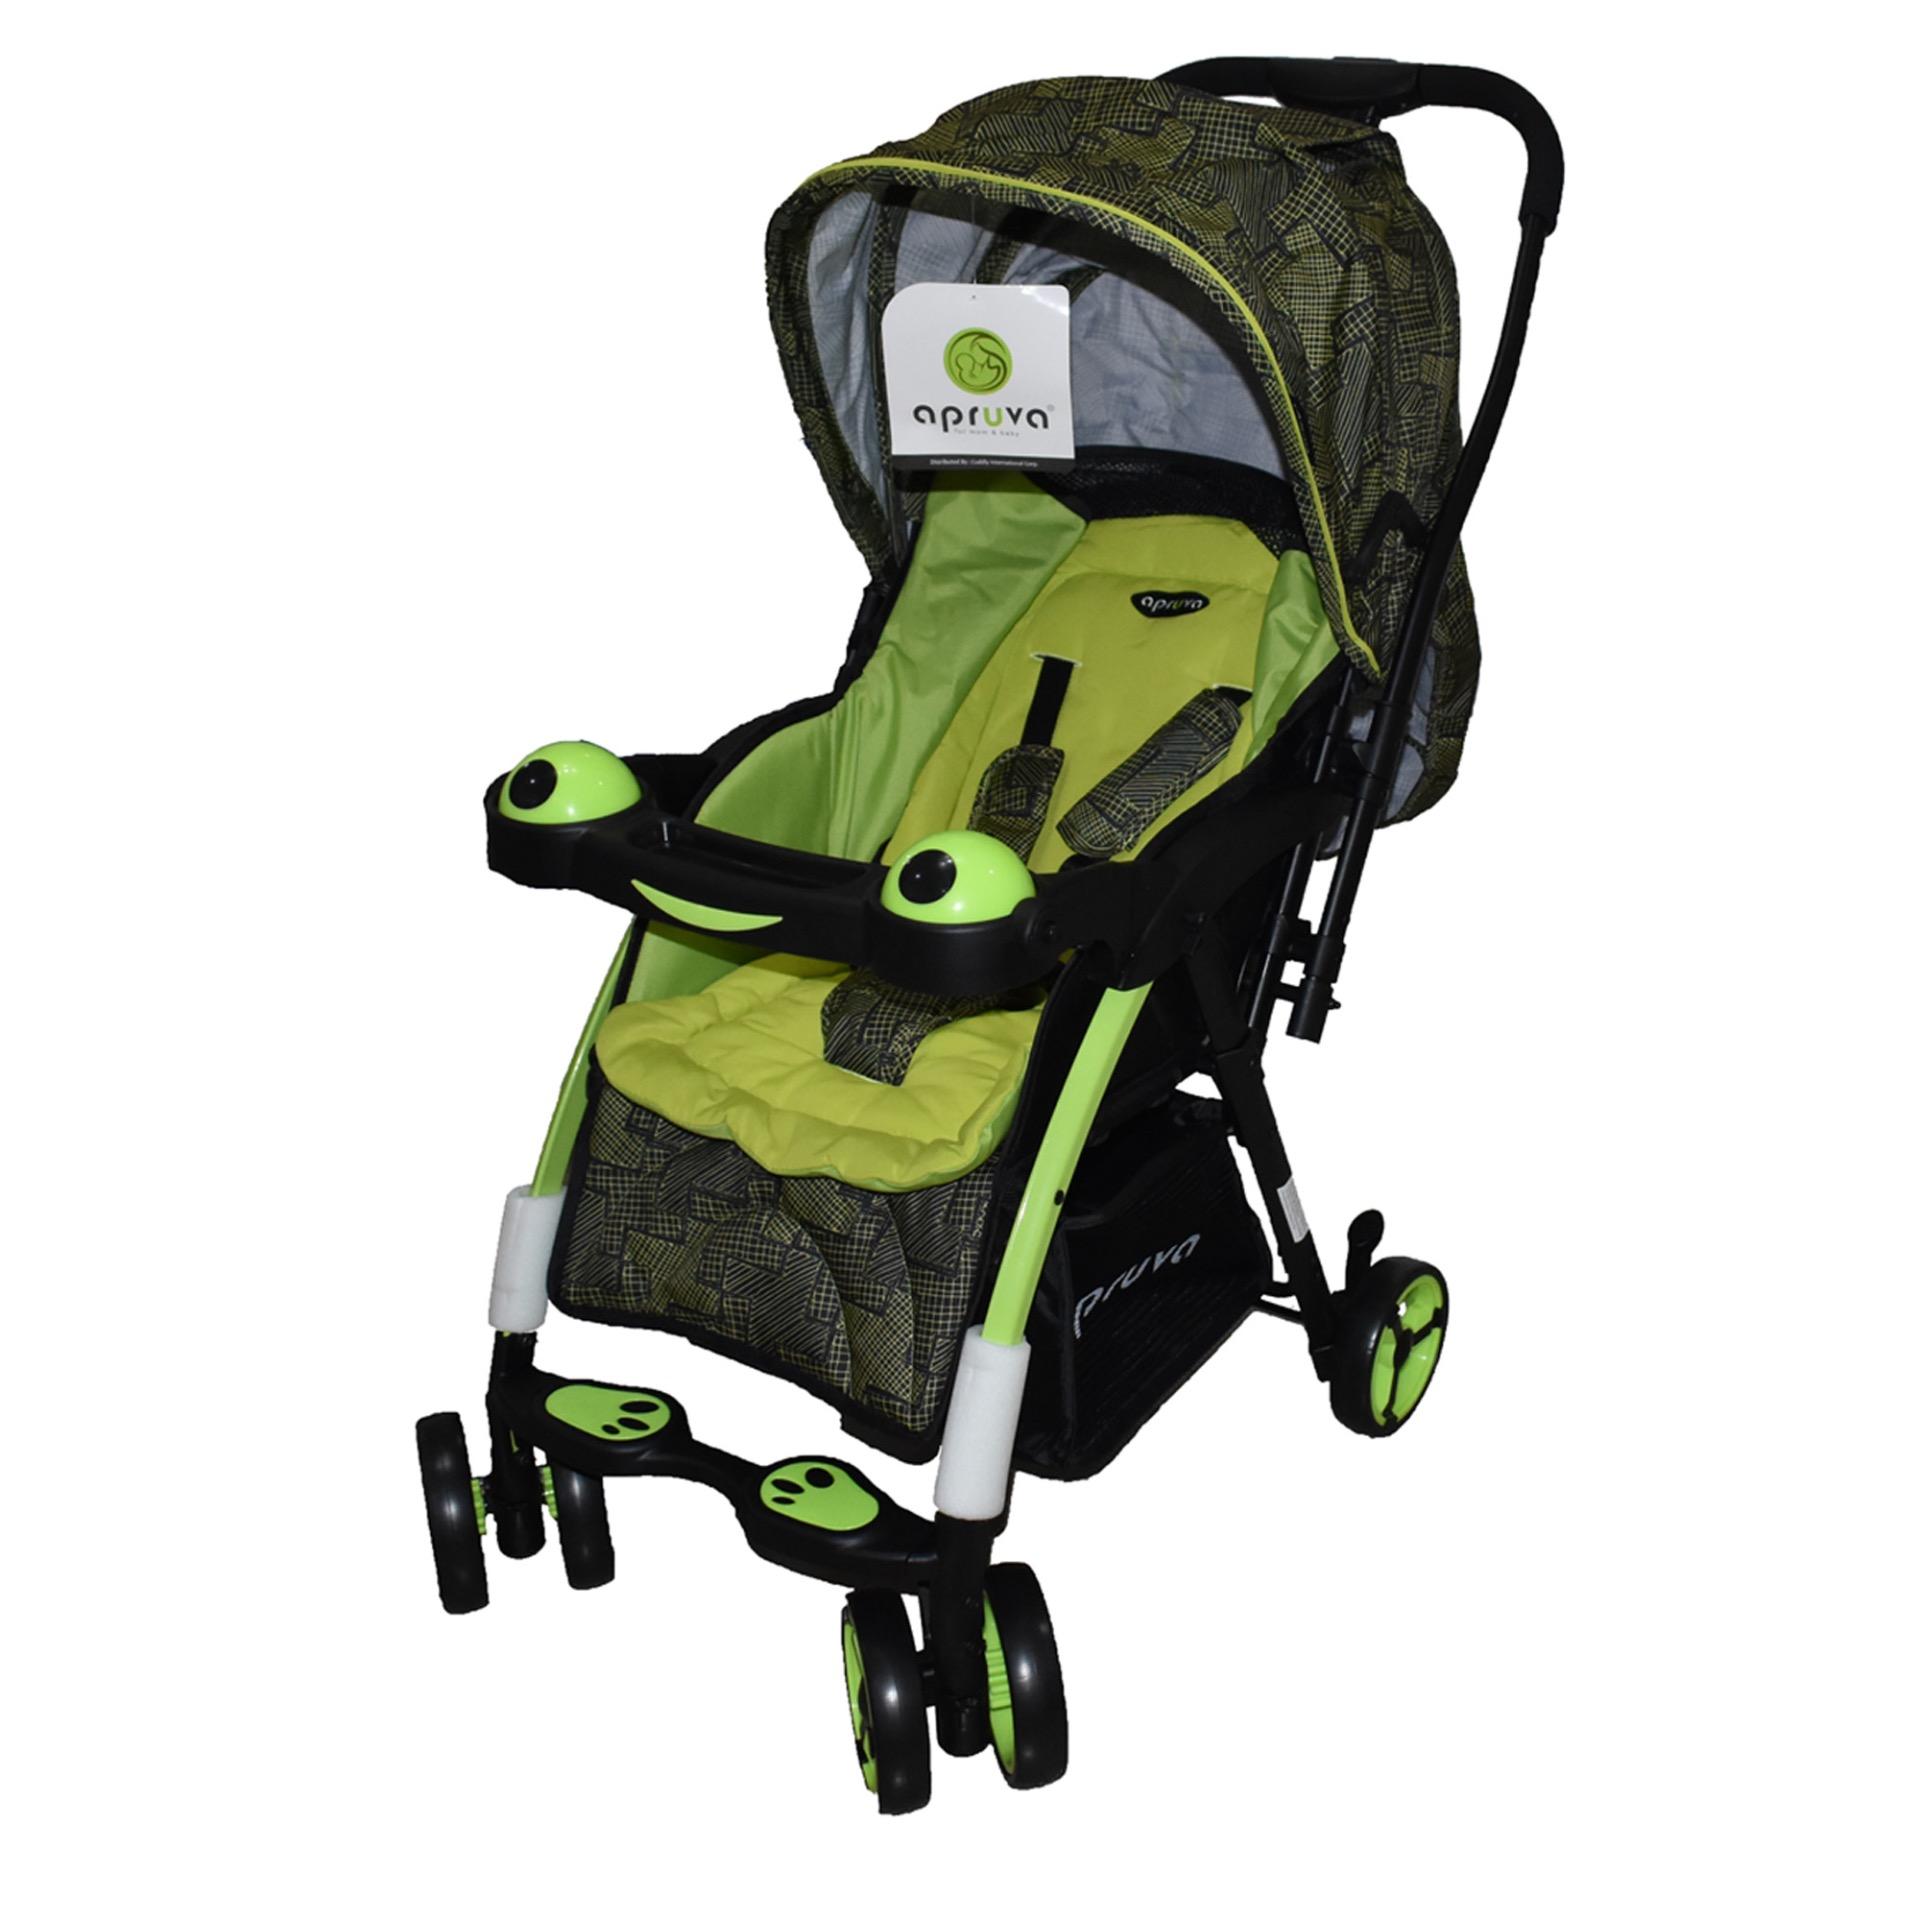 Apruva Folding Deluxe Baby Stroller with Reversible Handle, Green